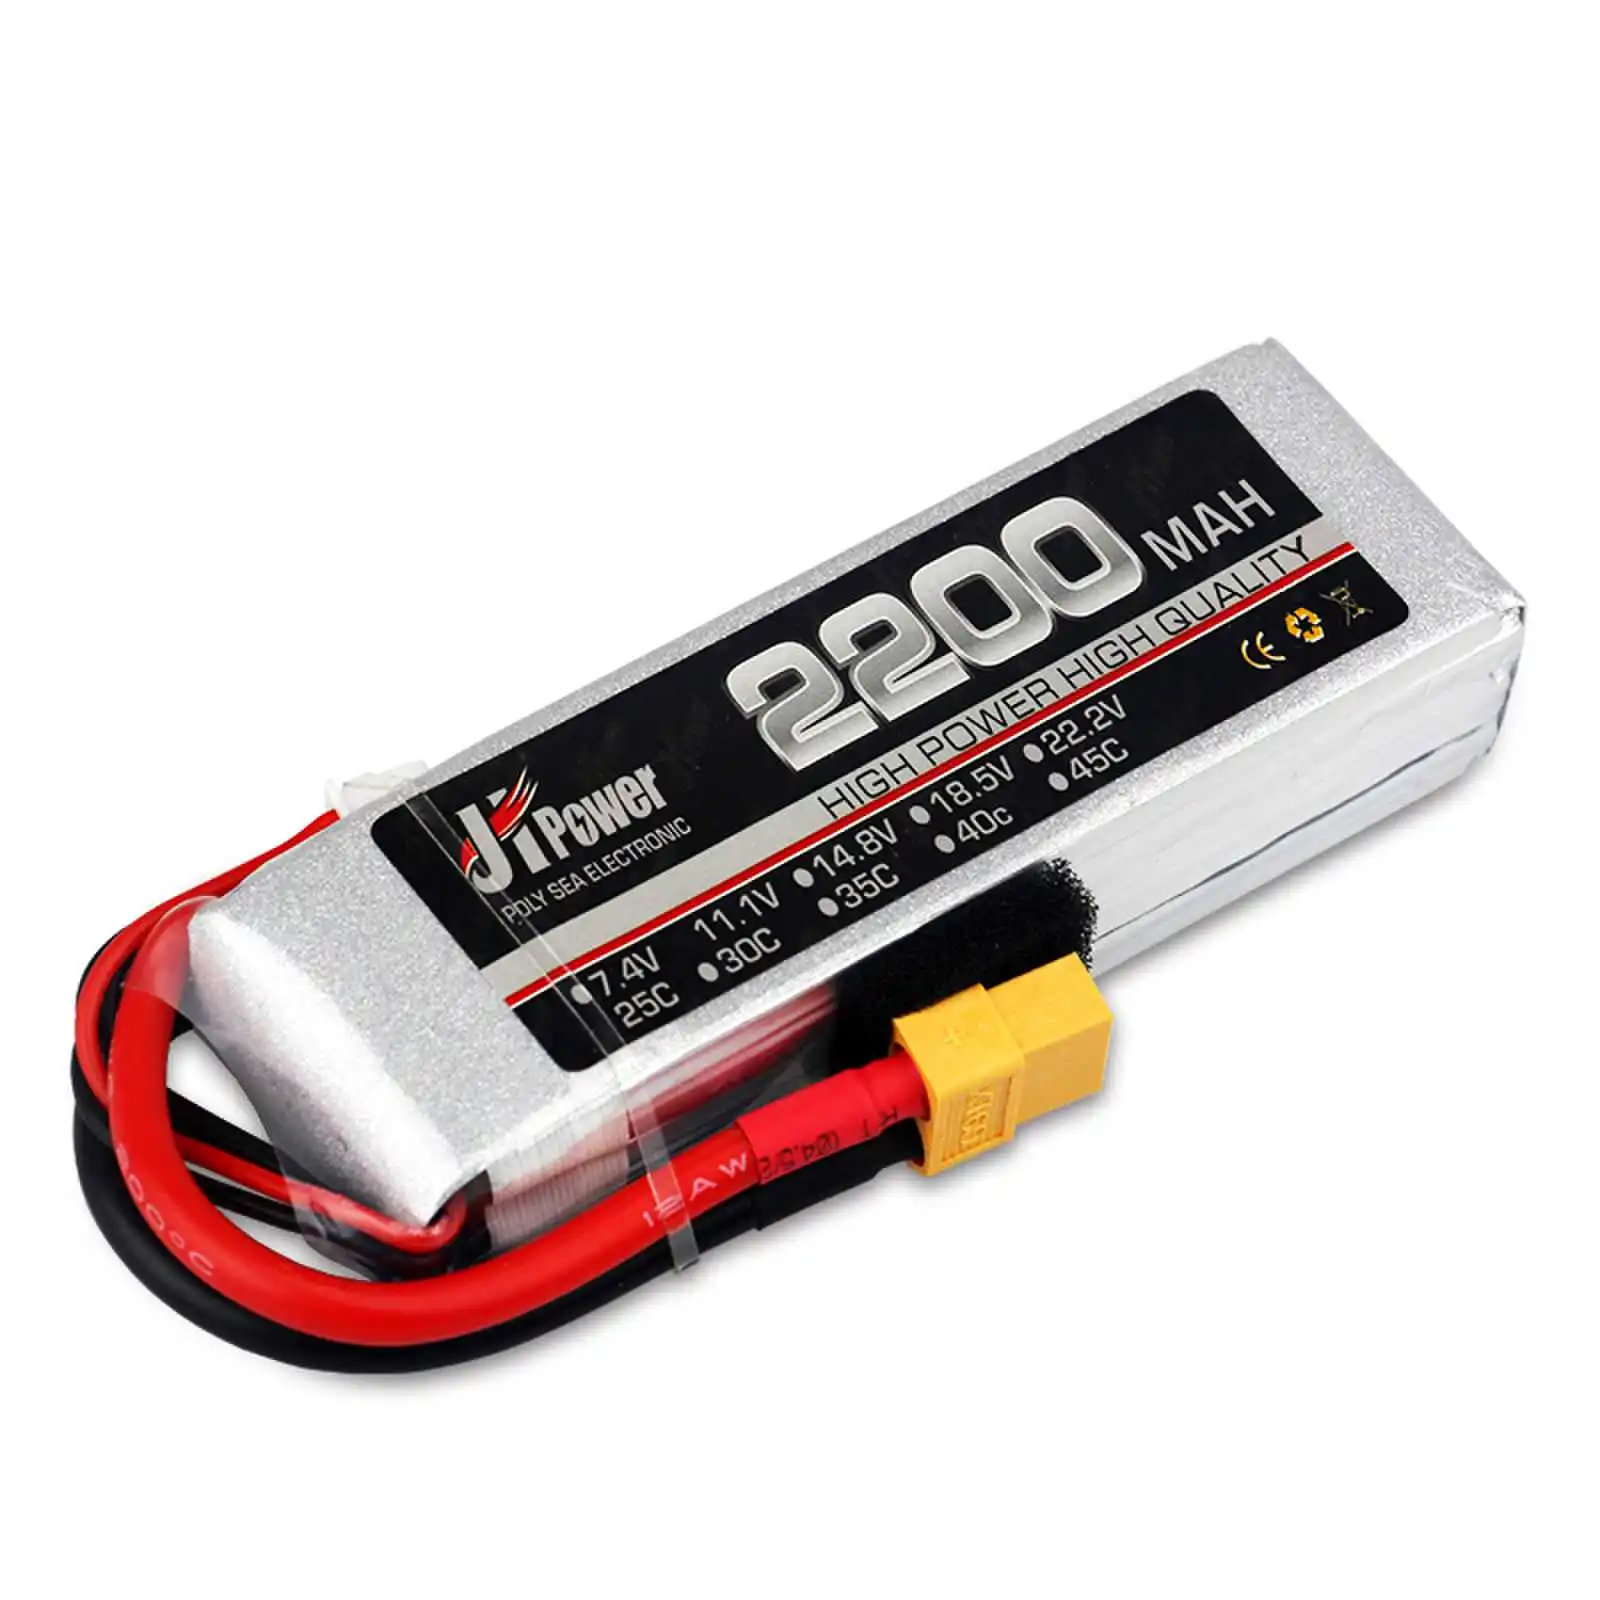 

JH Power 2S 3S 4S 5S 6S RC LiPo Battery 7.4V 11.1V 14.8V 18.5V 22.2V 2200mAh 25C 35C 45C 75C for RC Car Helicopter Boat RC Drone